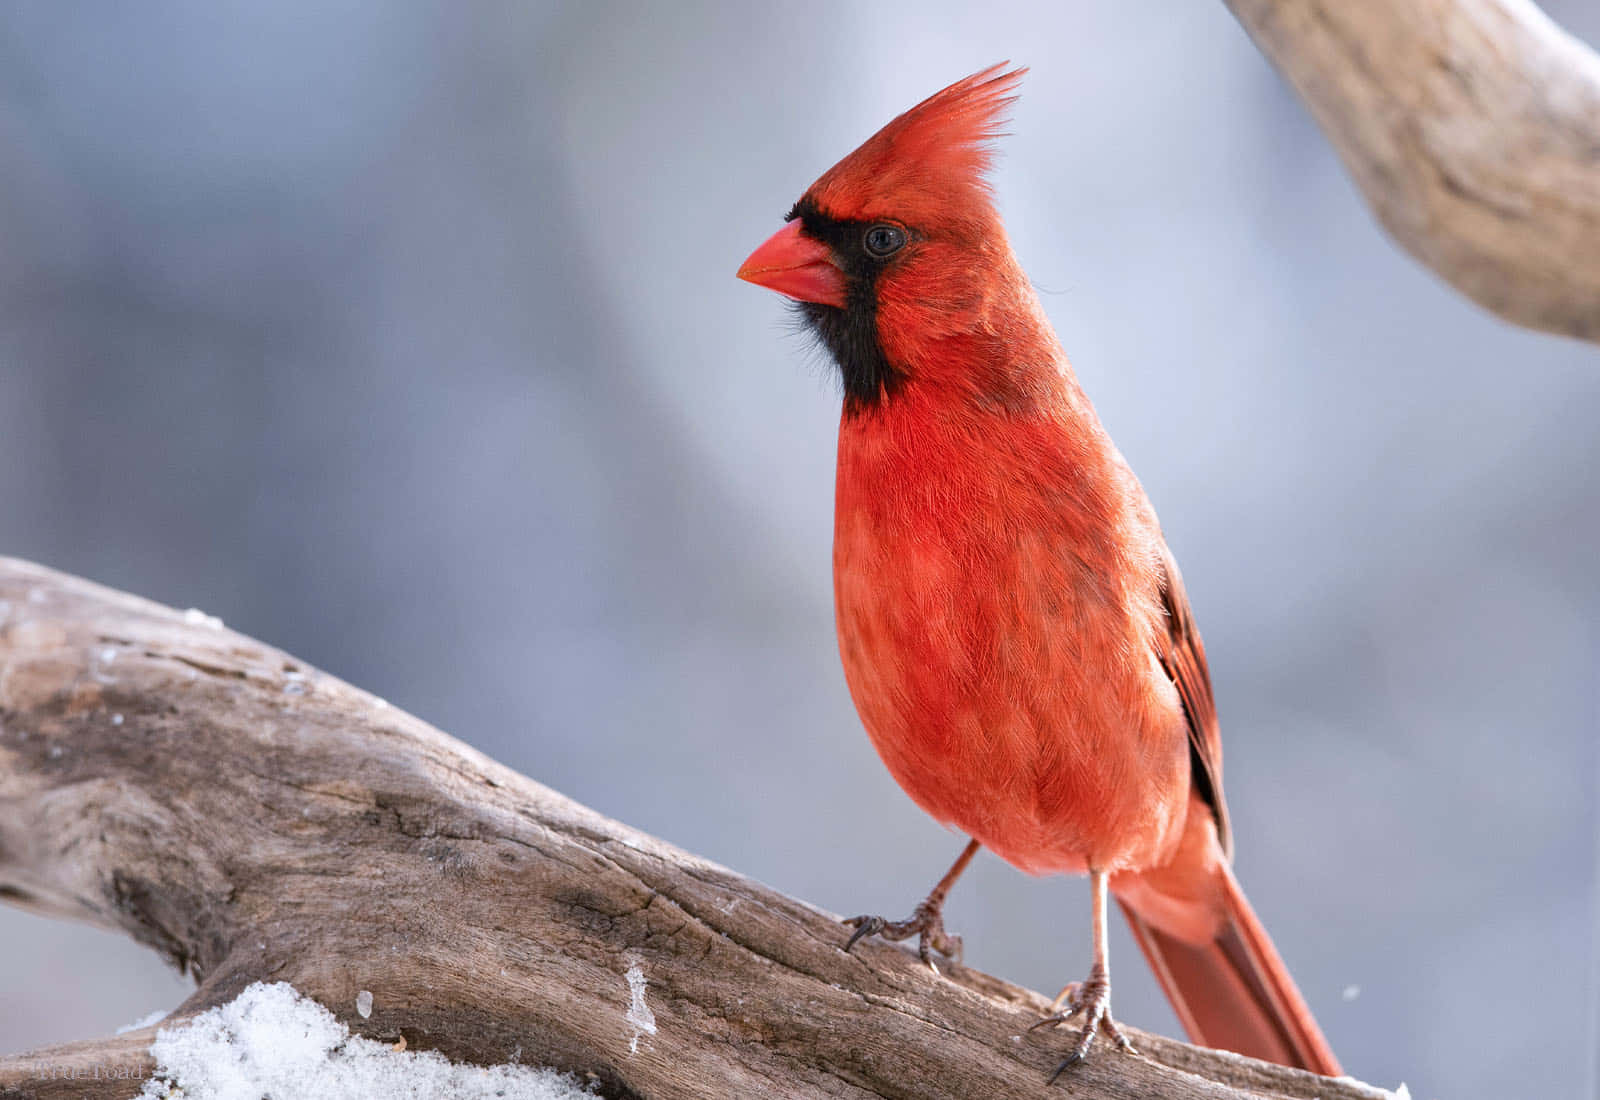 A Red Cardinal Is Sitting On A Branch In The Snow